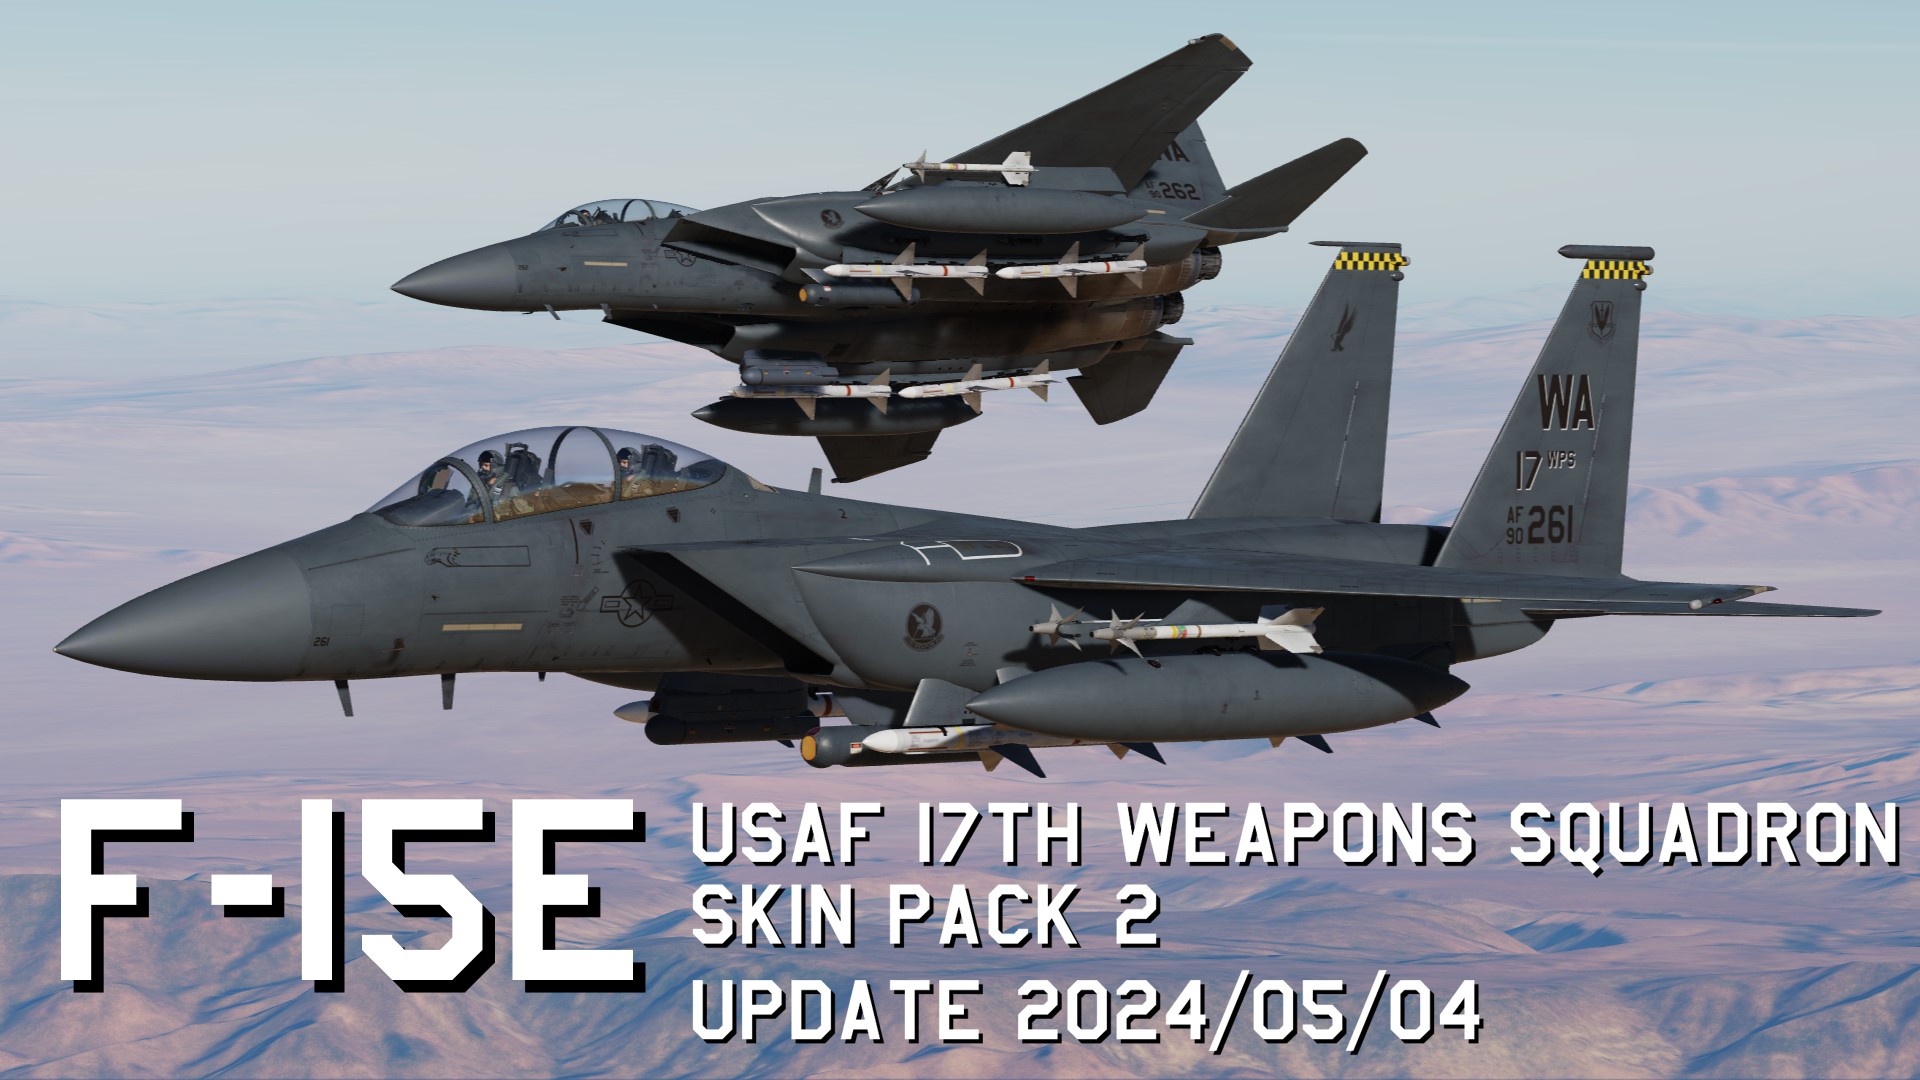 F-15E USAF 17th Weapons Squadron Skin Pack 2 update 2024/05/04